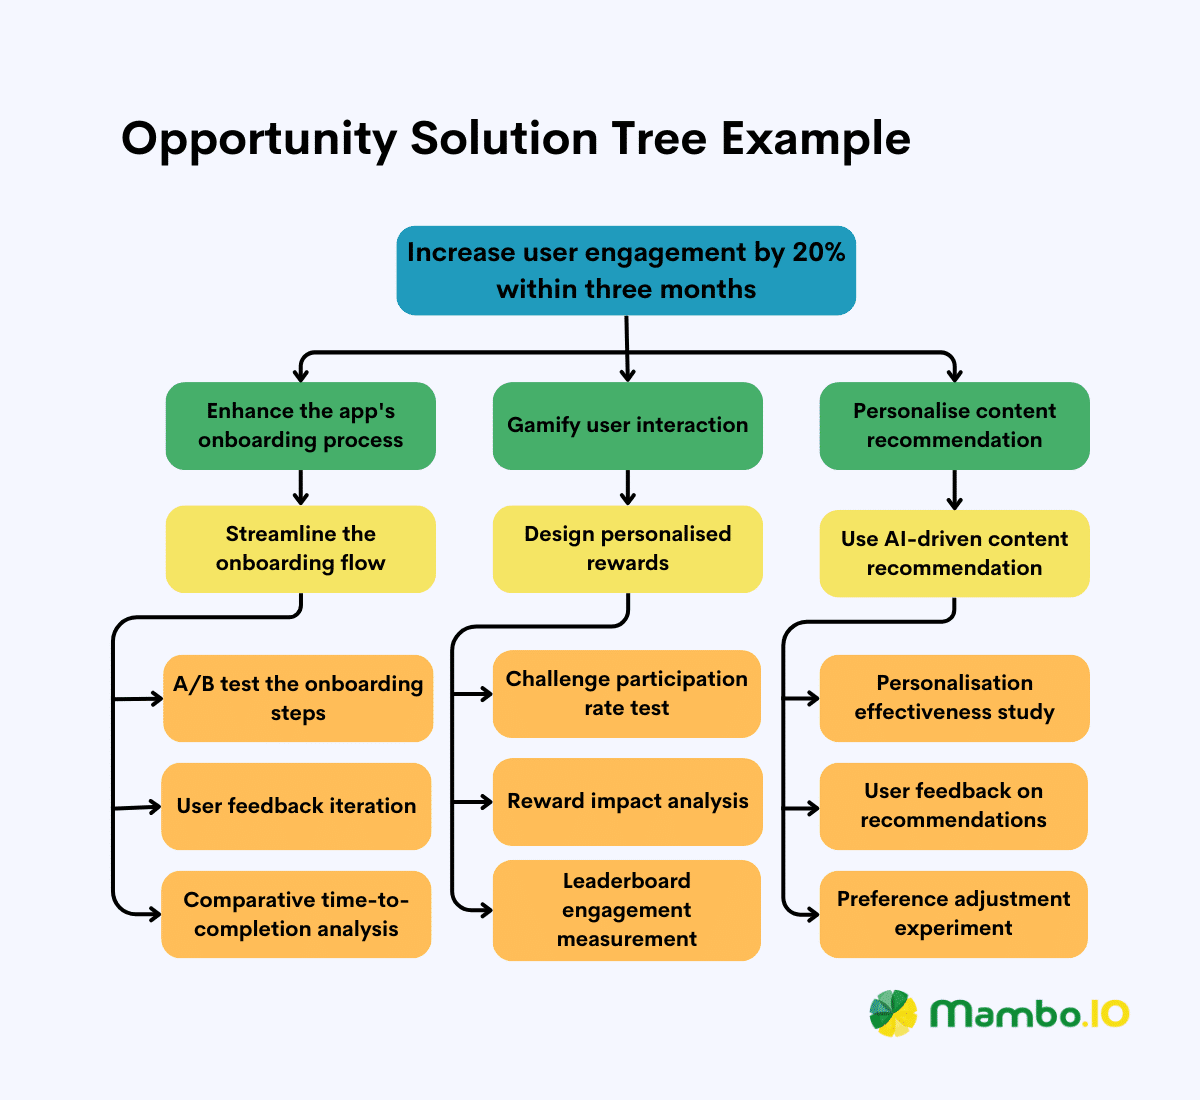 An example of opportunity solution tree